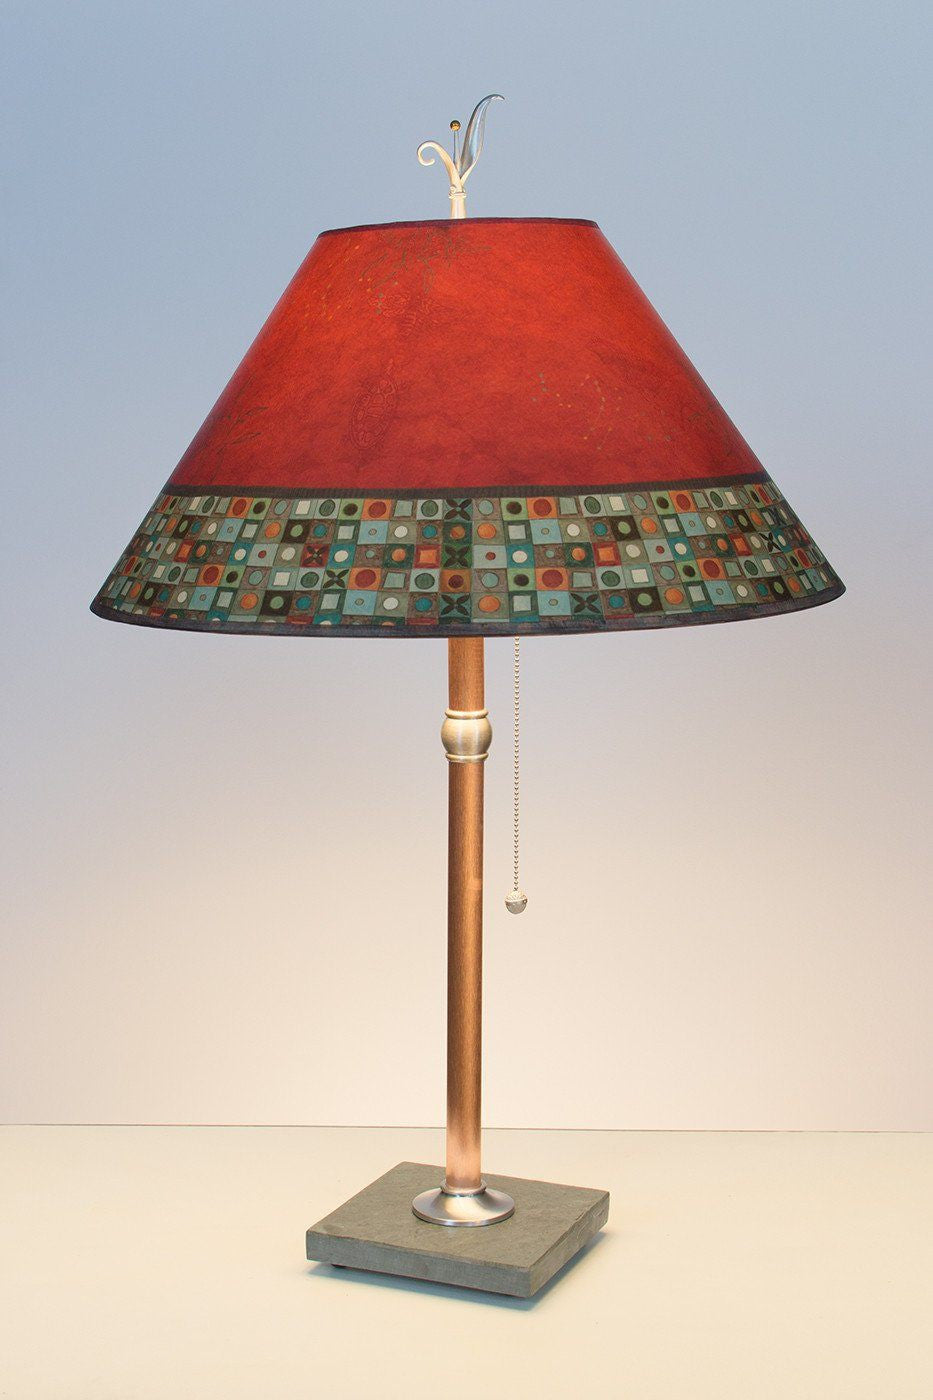 Janna Ugone & Co Table Lamps Copper Table Lamp with Large Conical Shade in Red Mosaic